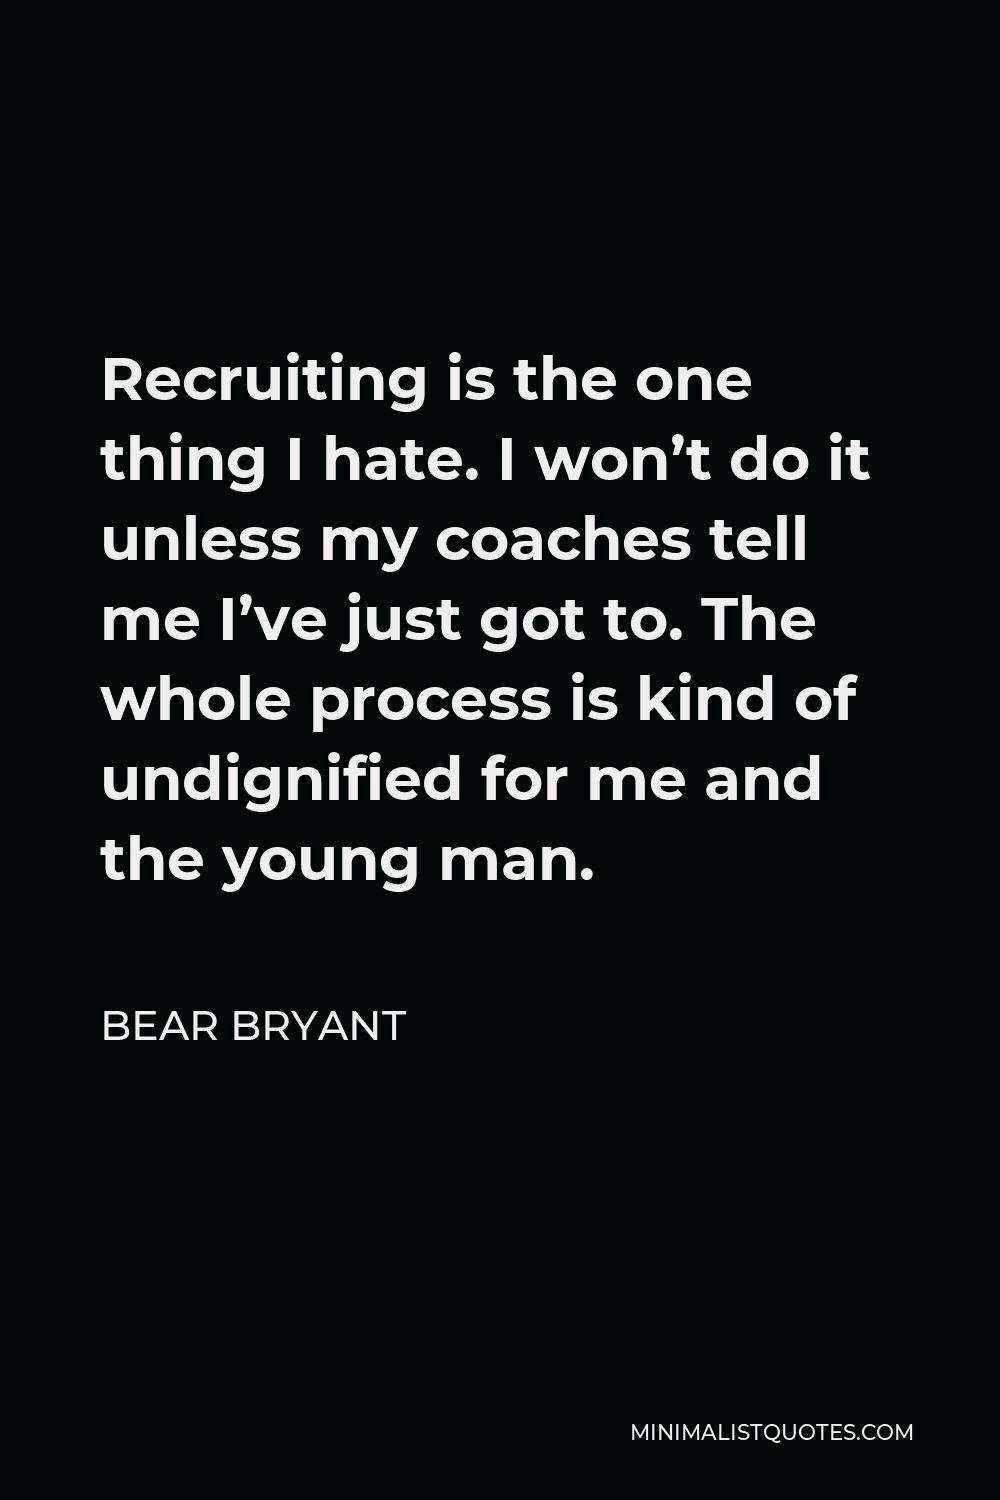 Bear Bryant Quote - Recruiting is the one thing I hate. I won’t do it unless my coaches tell me I’ve just got to. The whole process is kind of undignified for me and the young man.